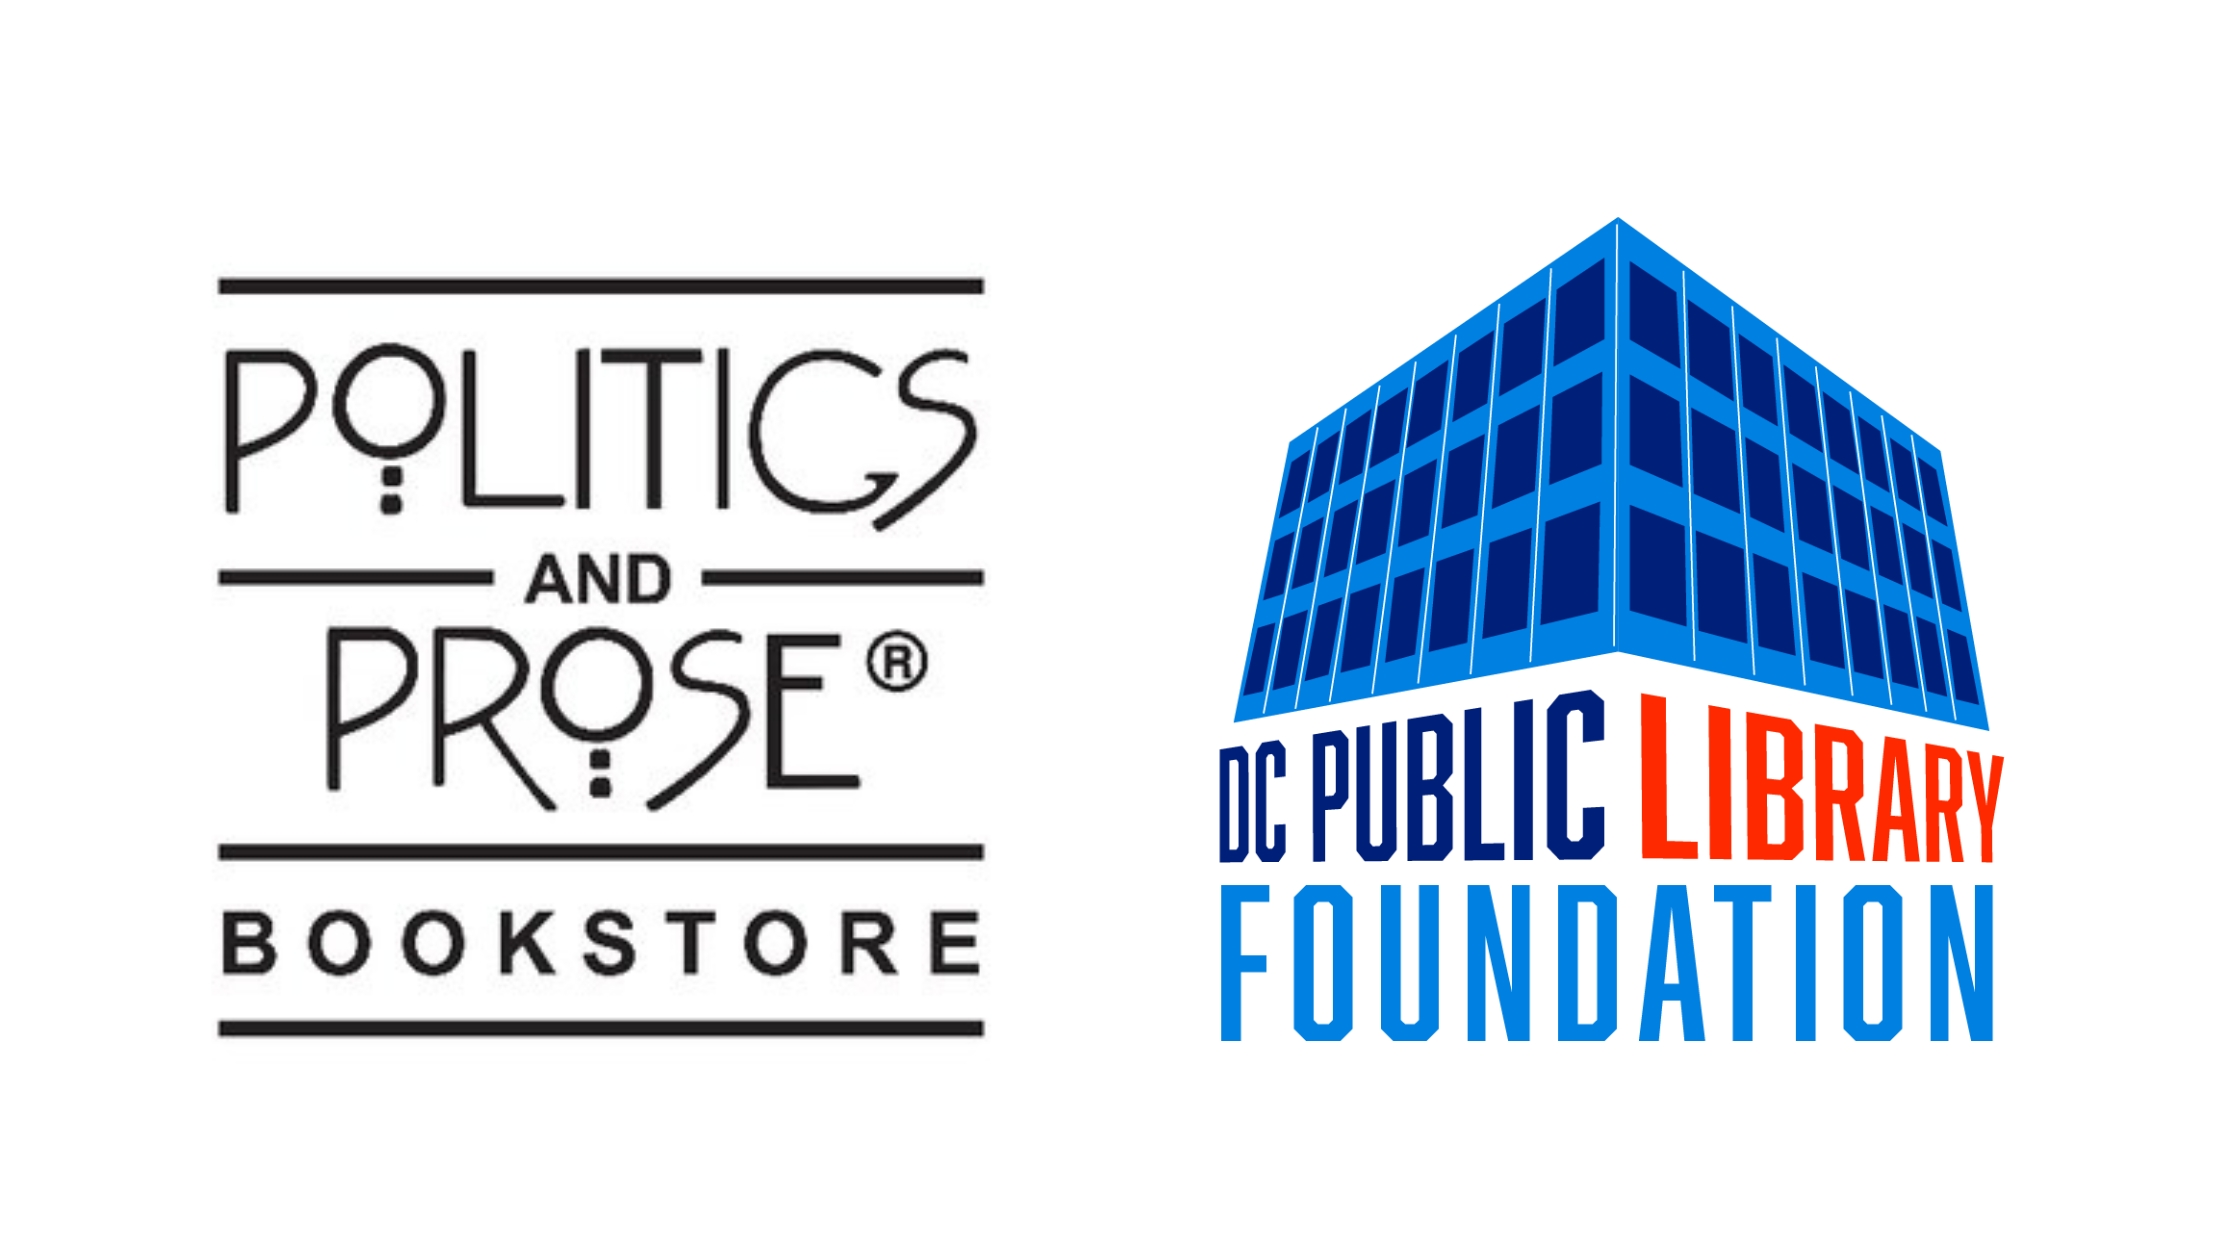 Politics and Prose and DC Public Library Foundation logos